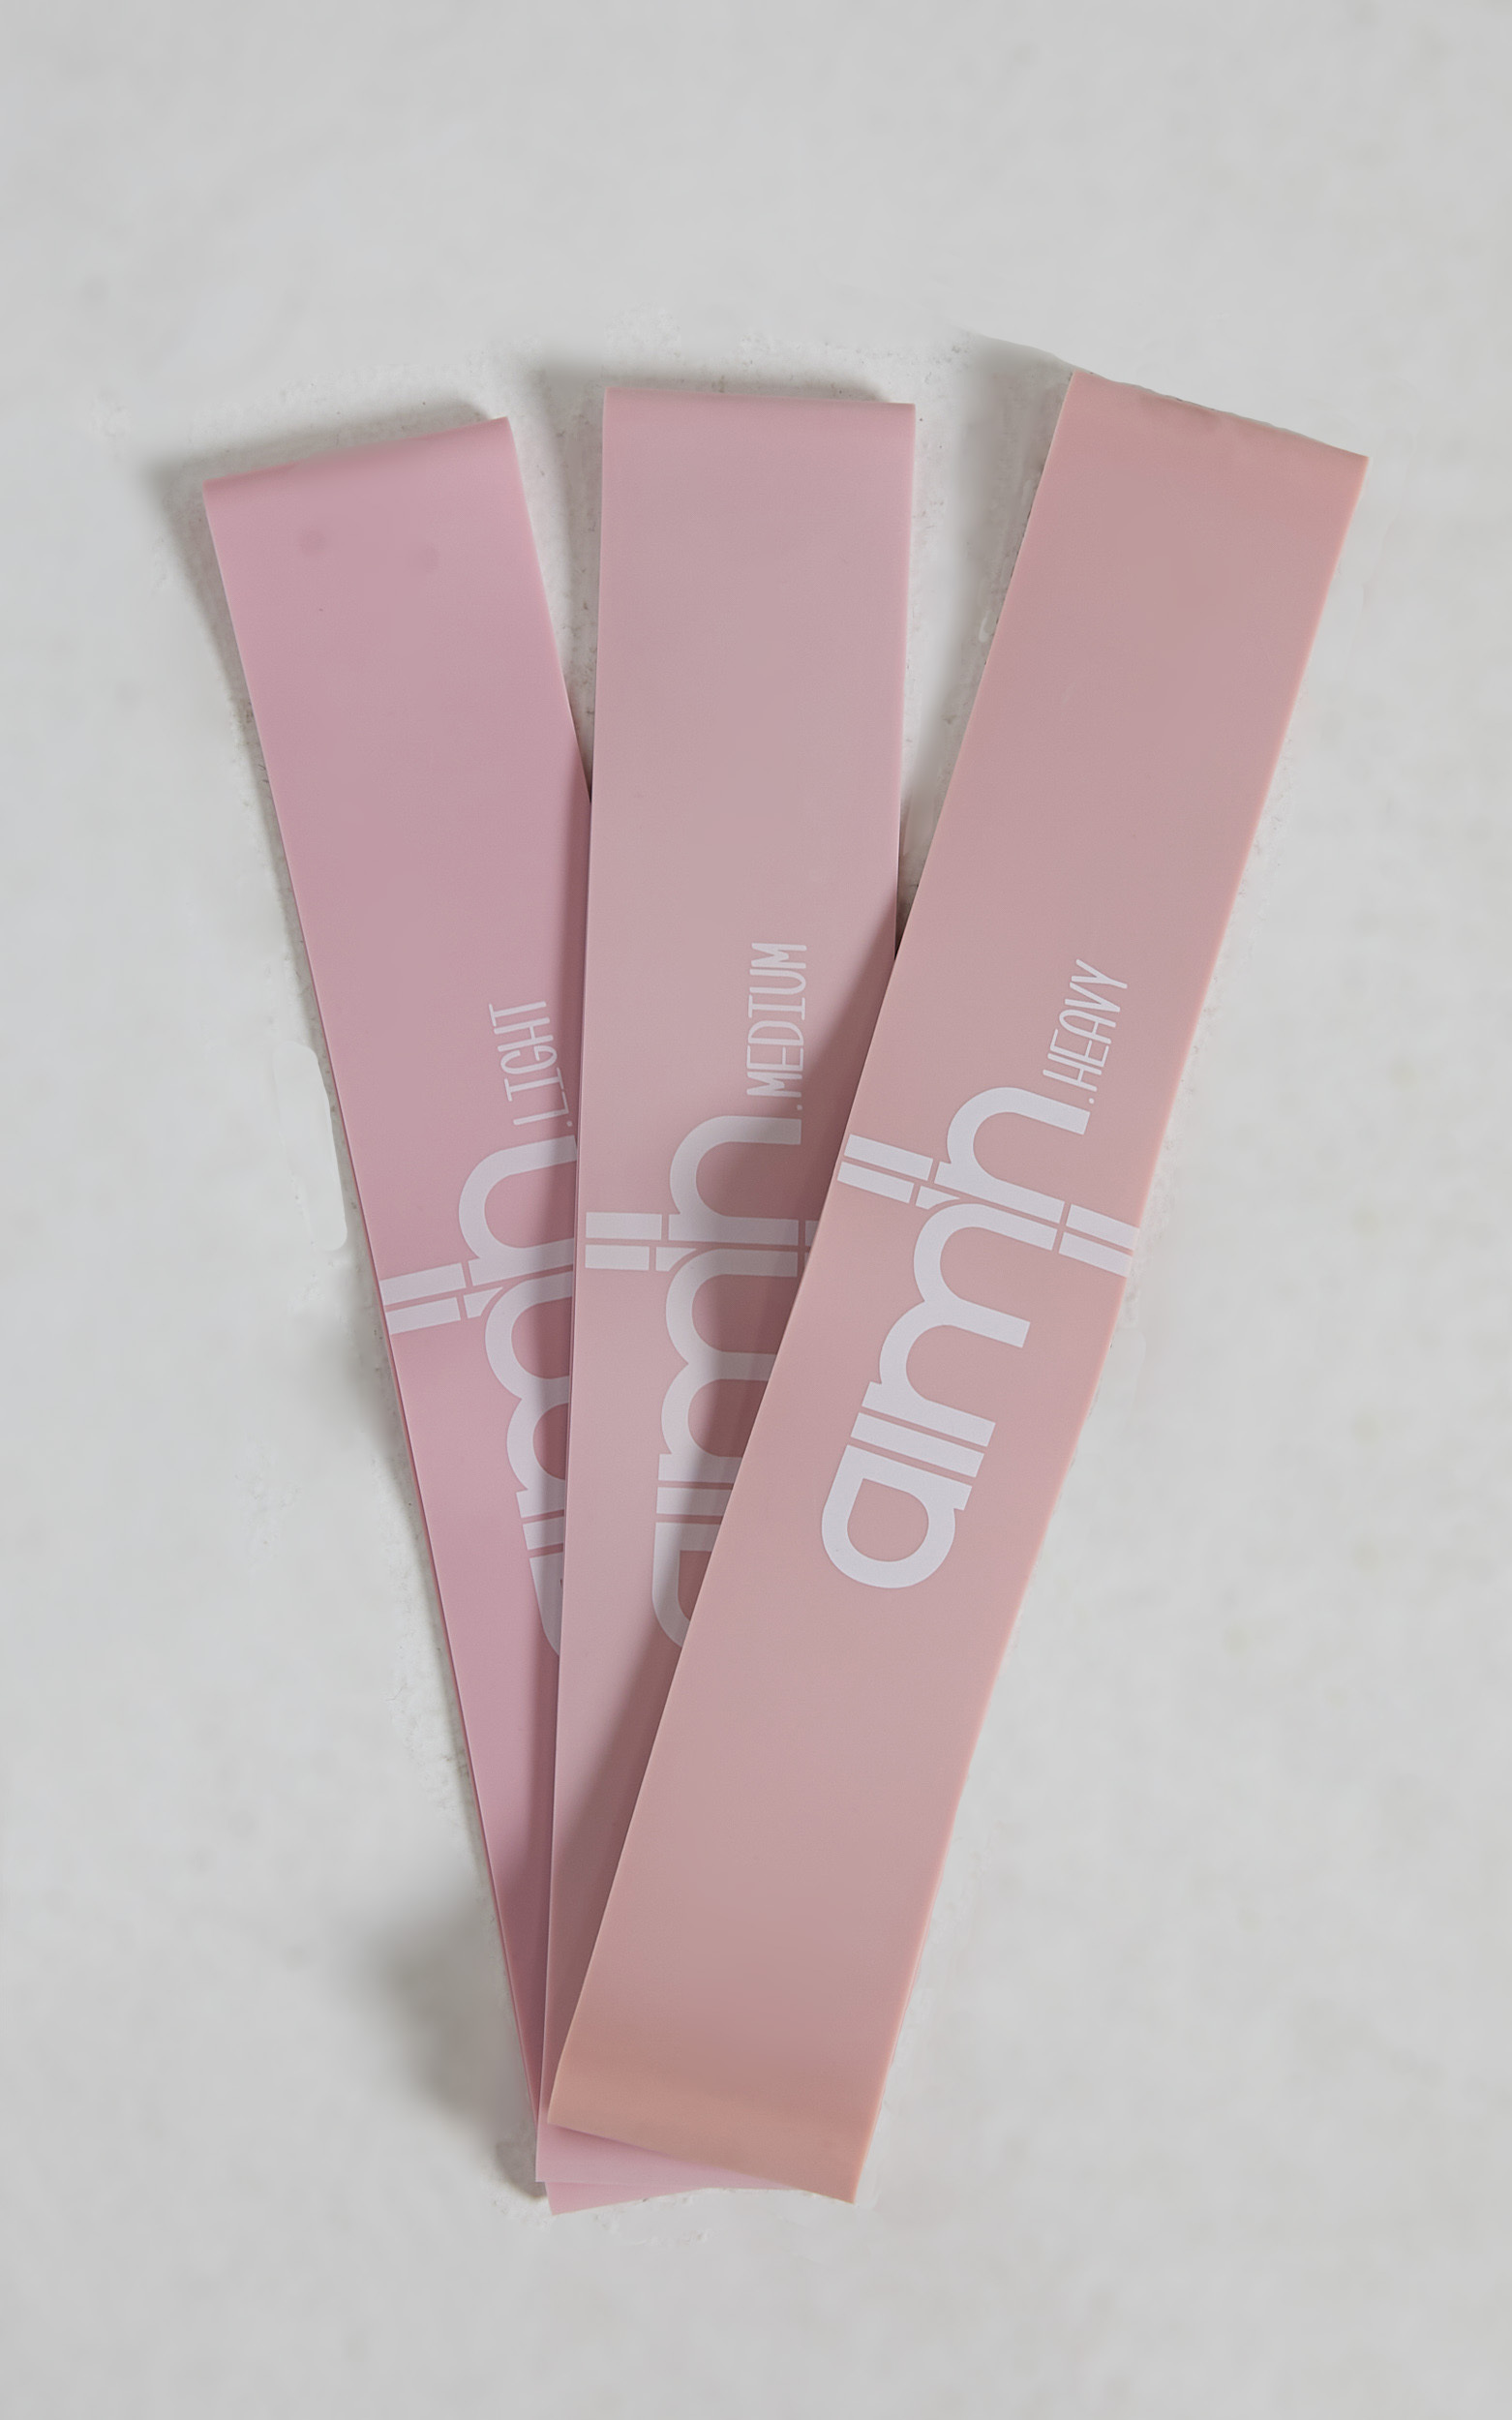 Aim'n - RESISTANCE BAND in Pink - OneSize, PNK1, hi-res image number null